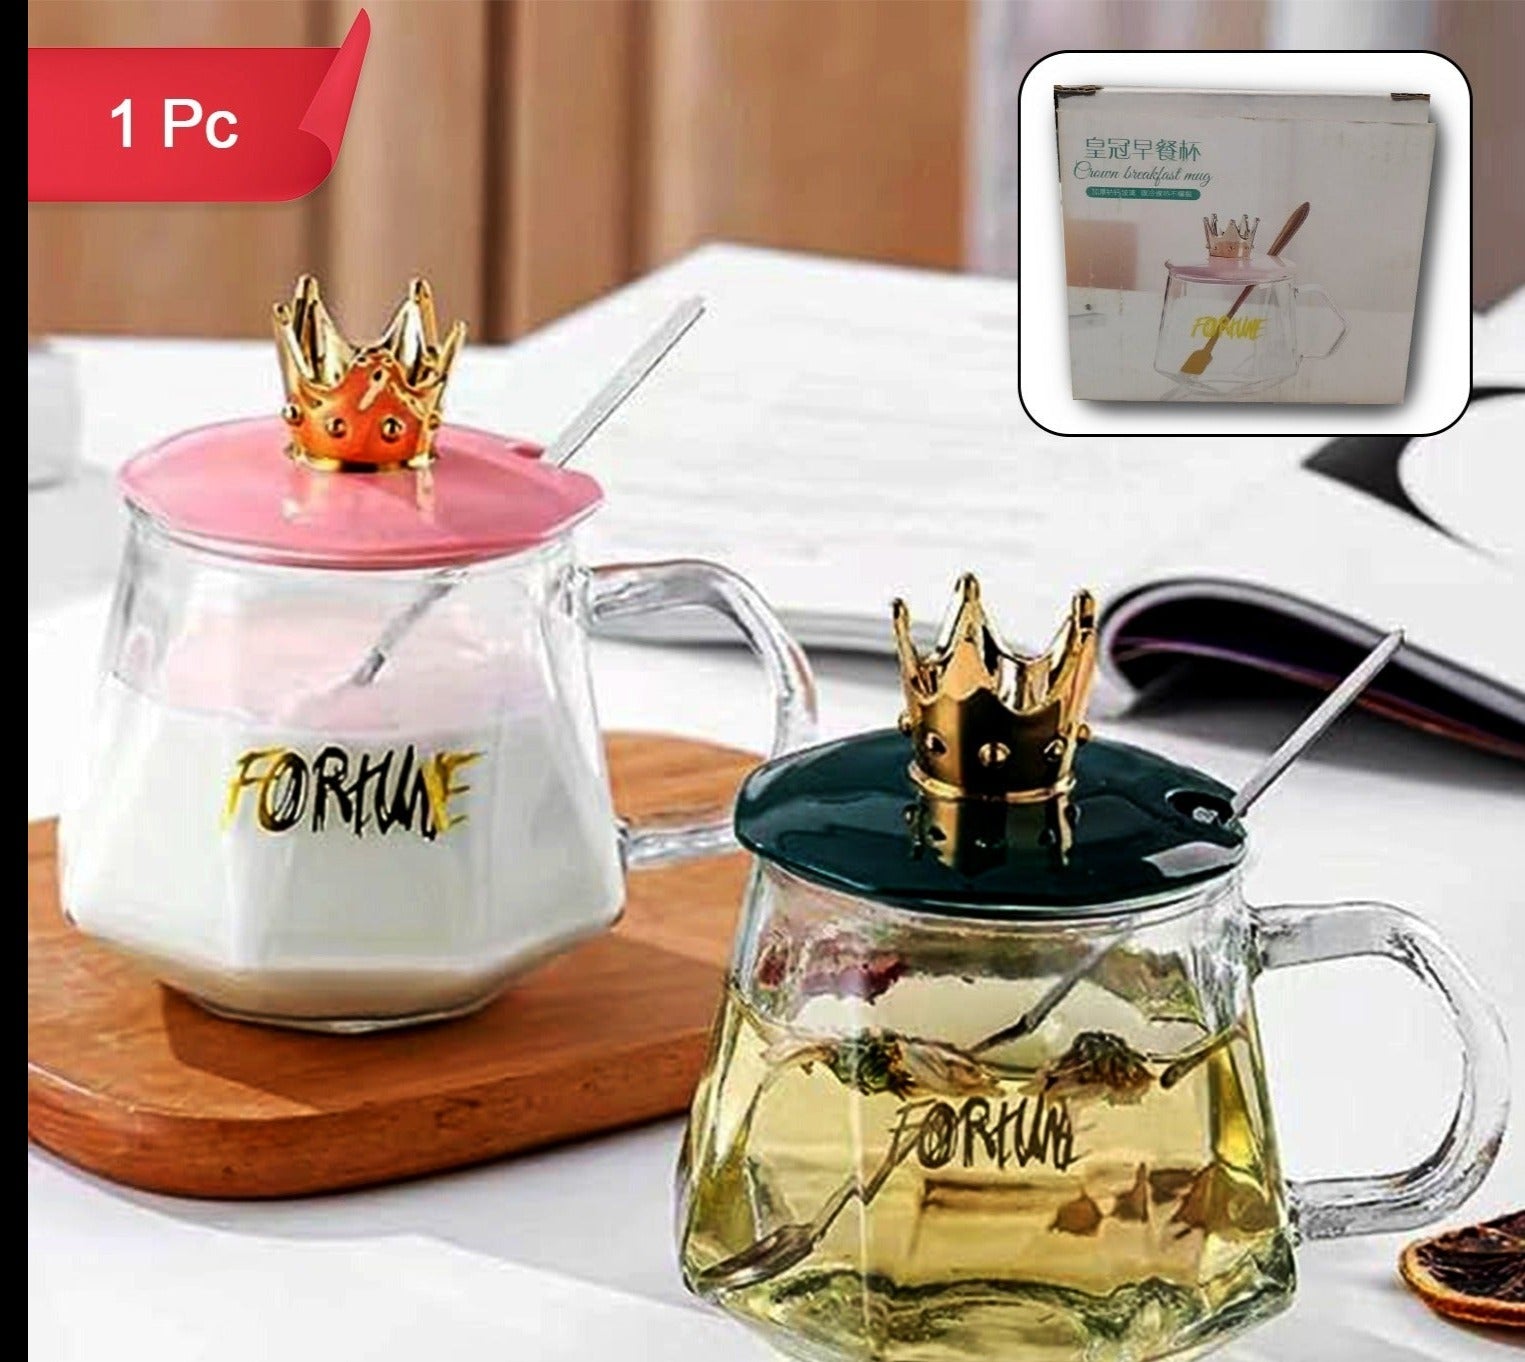 Golden Crown Tea-Coffee Mug Set with Stainless Spoon - Clear Glass Cup for Milk, Chocolate, or Any Beverage (1 Pc)